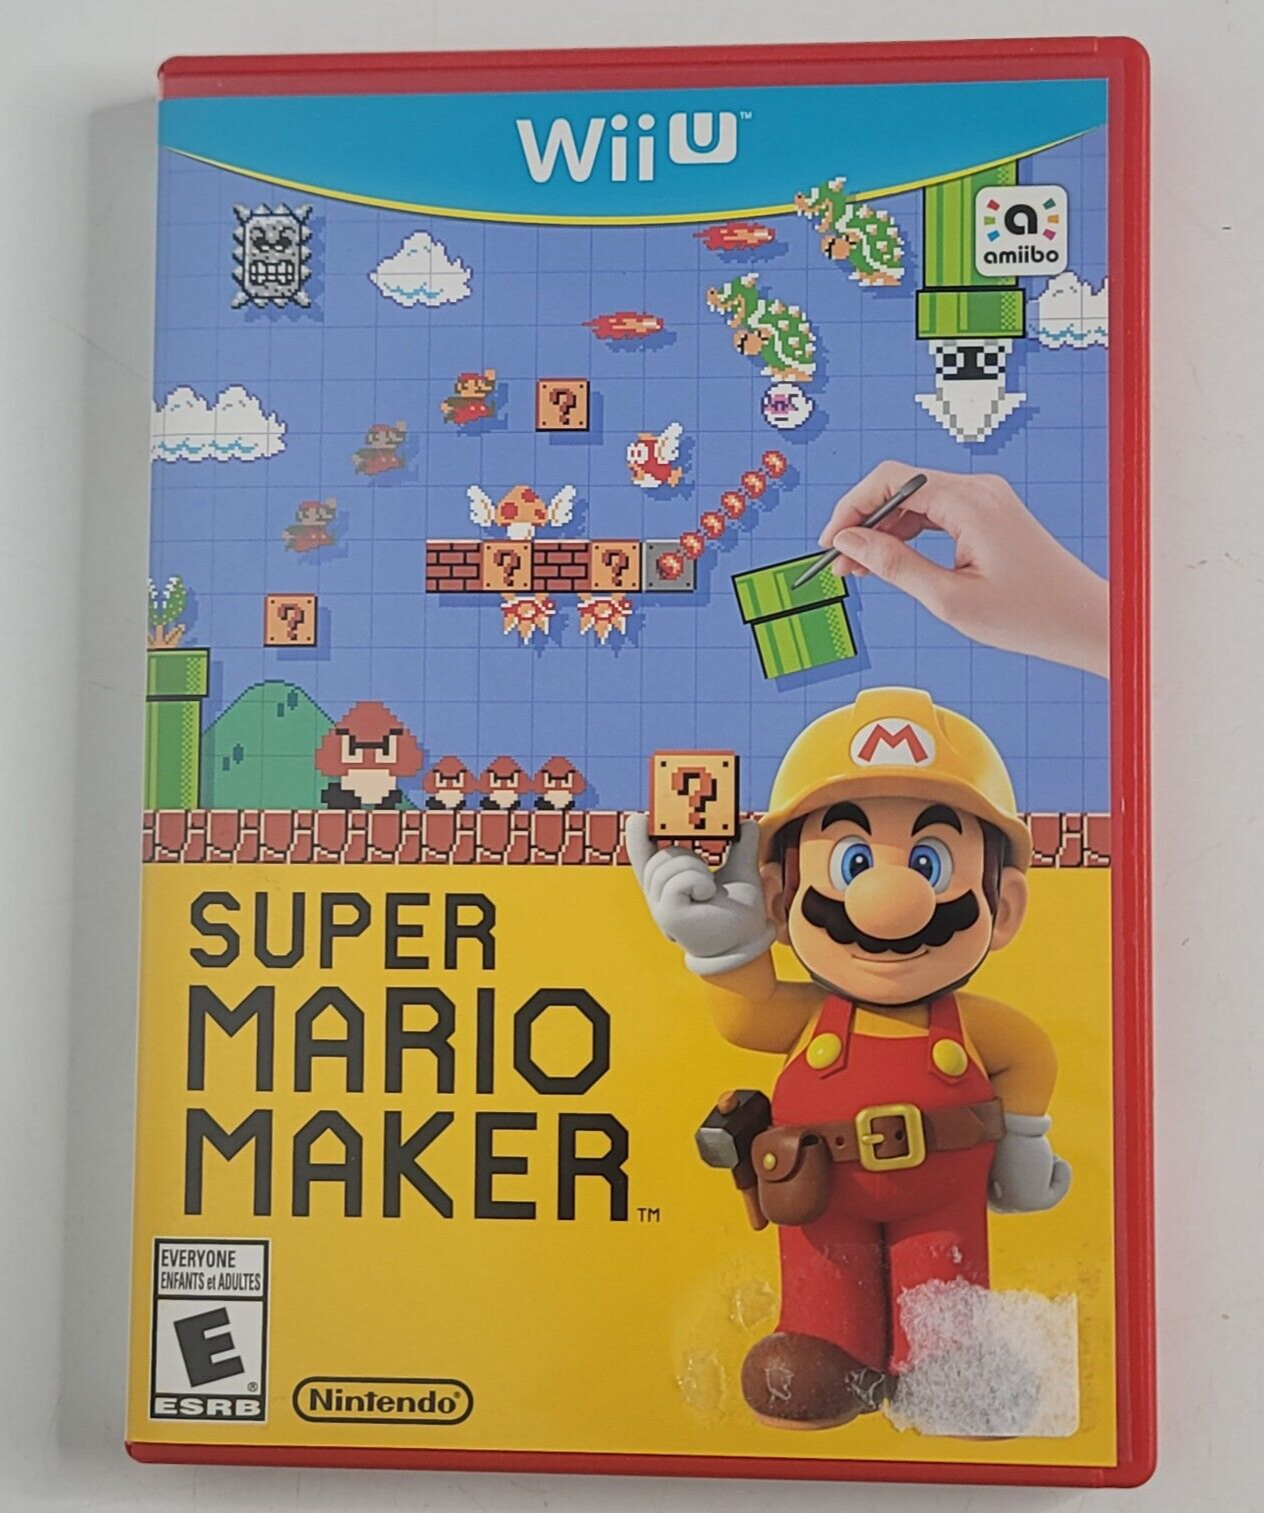 Super Mario Maker Nintendo Wii U Game 2015 Complete Tested w/Electronic Manual - $9.99